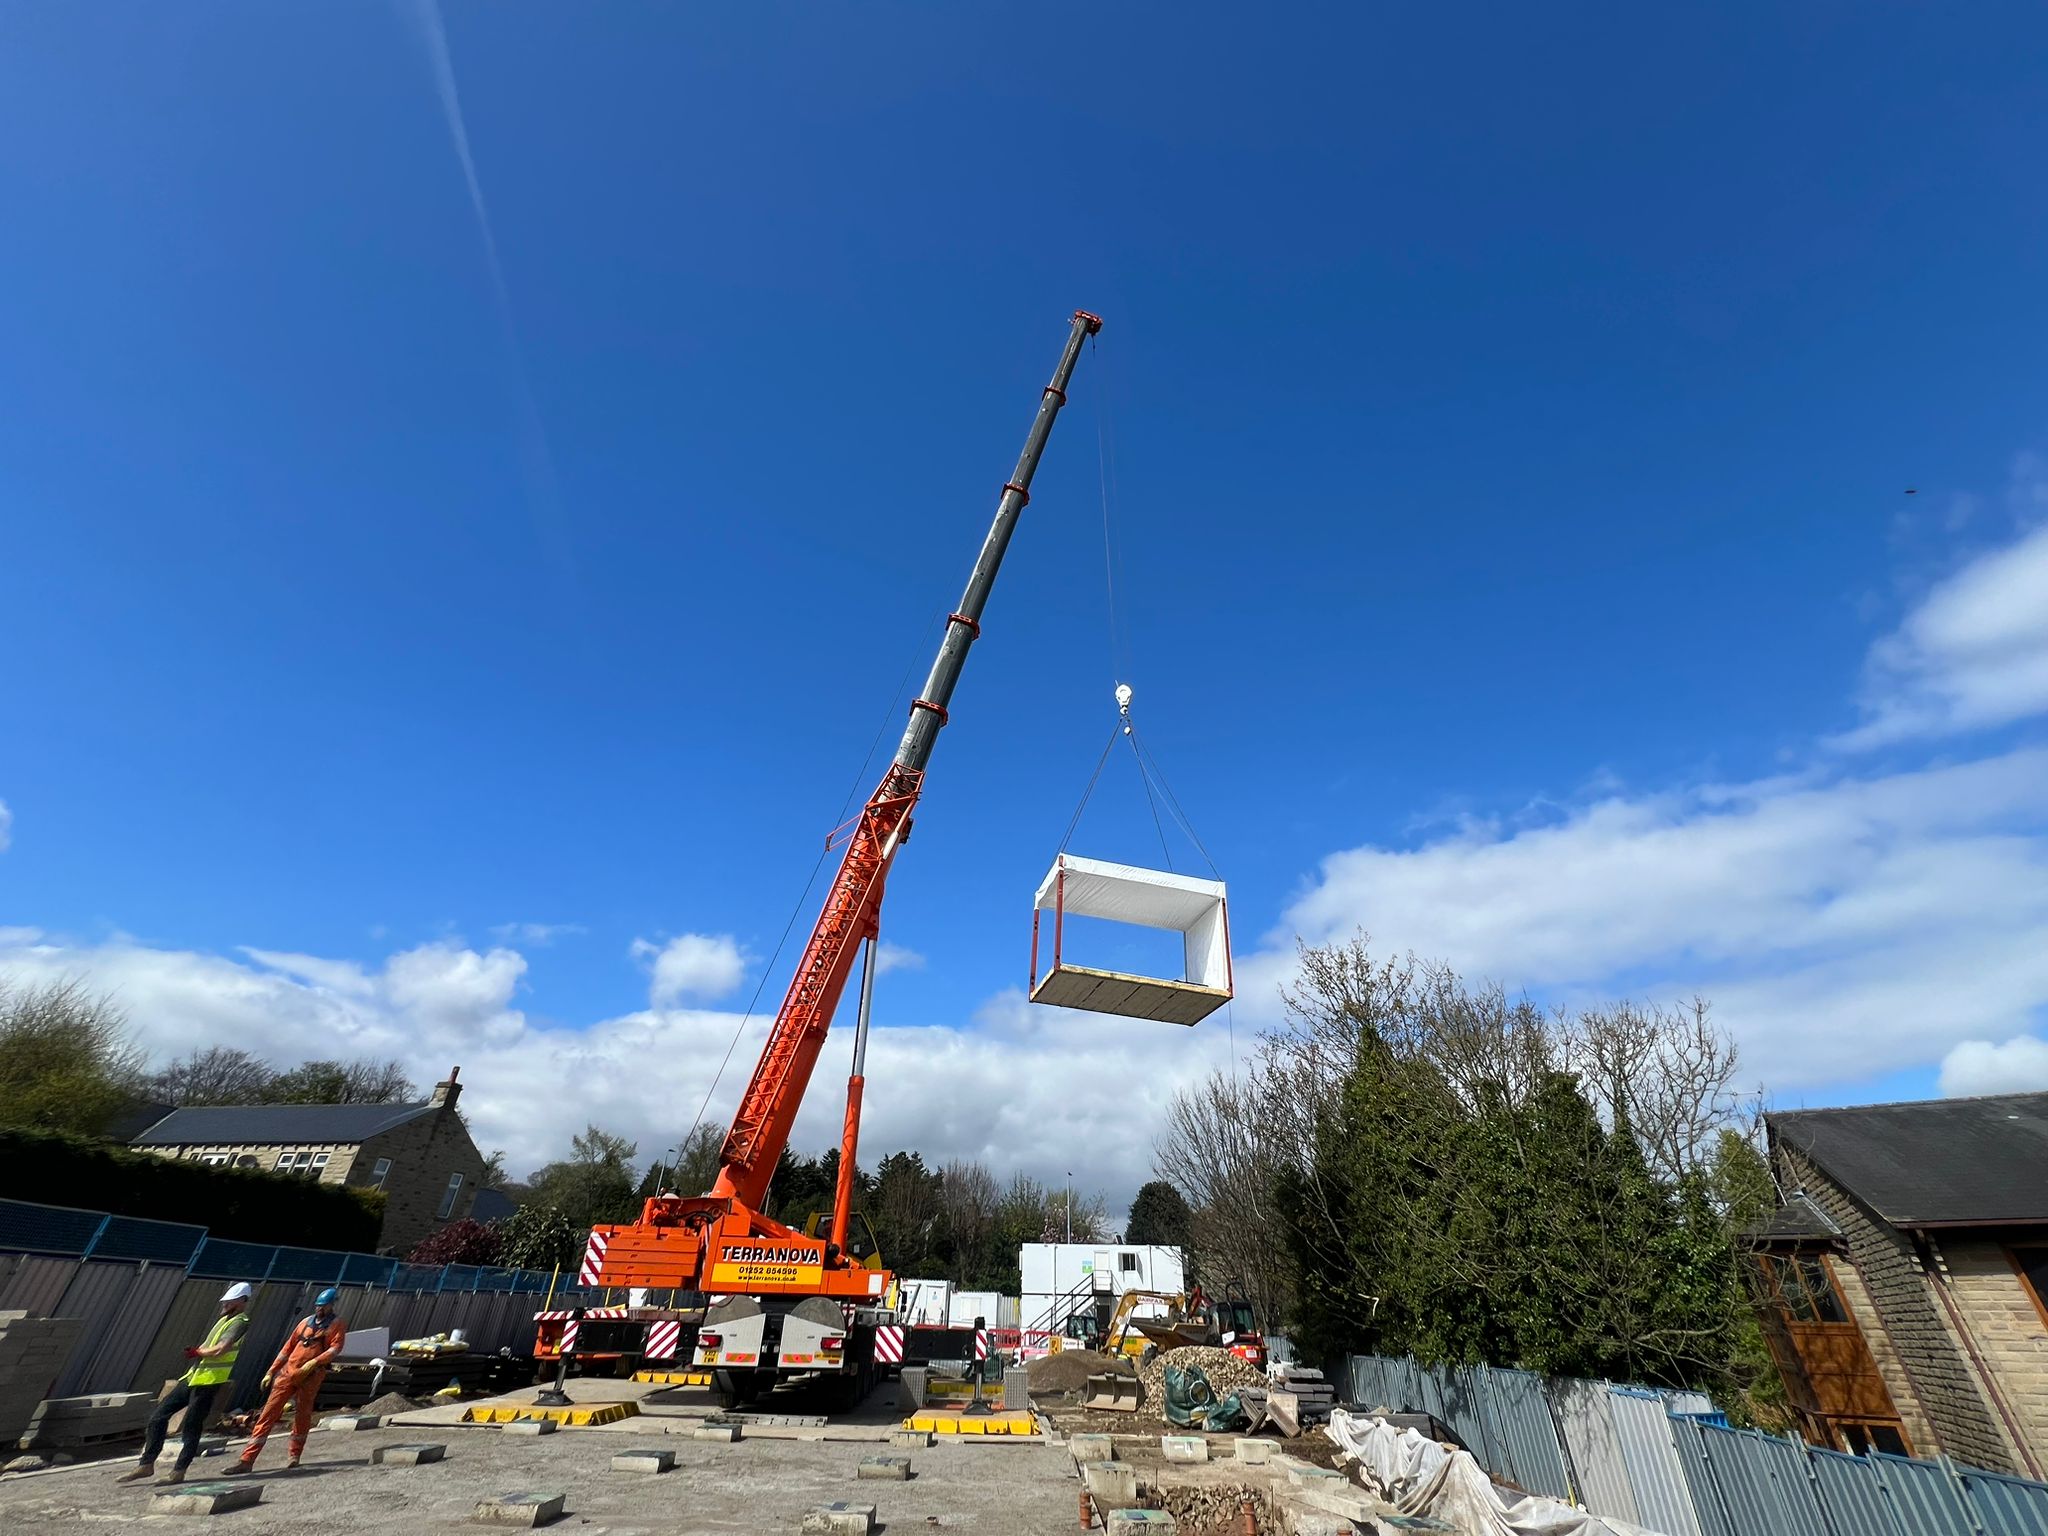 A crane lifts a section into place